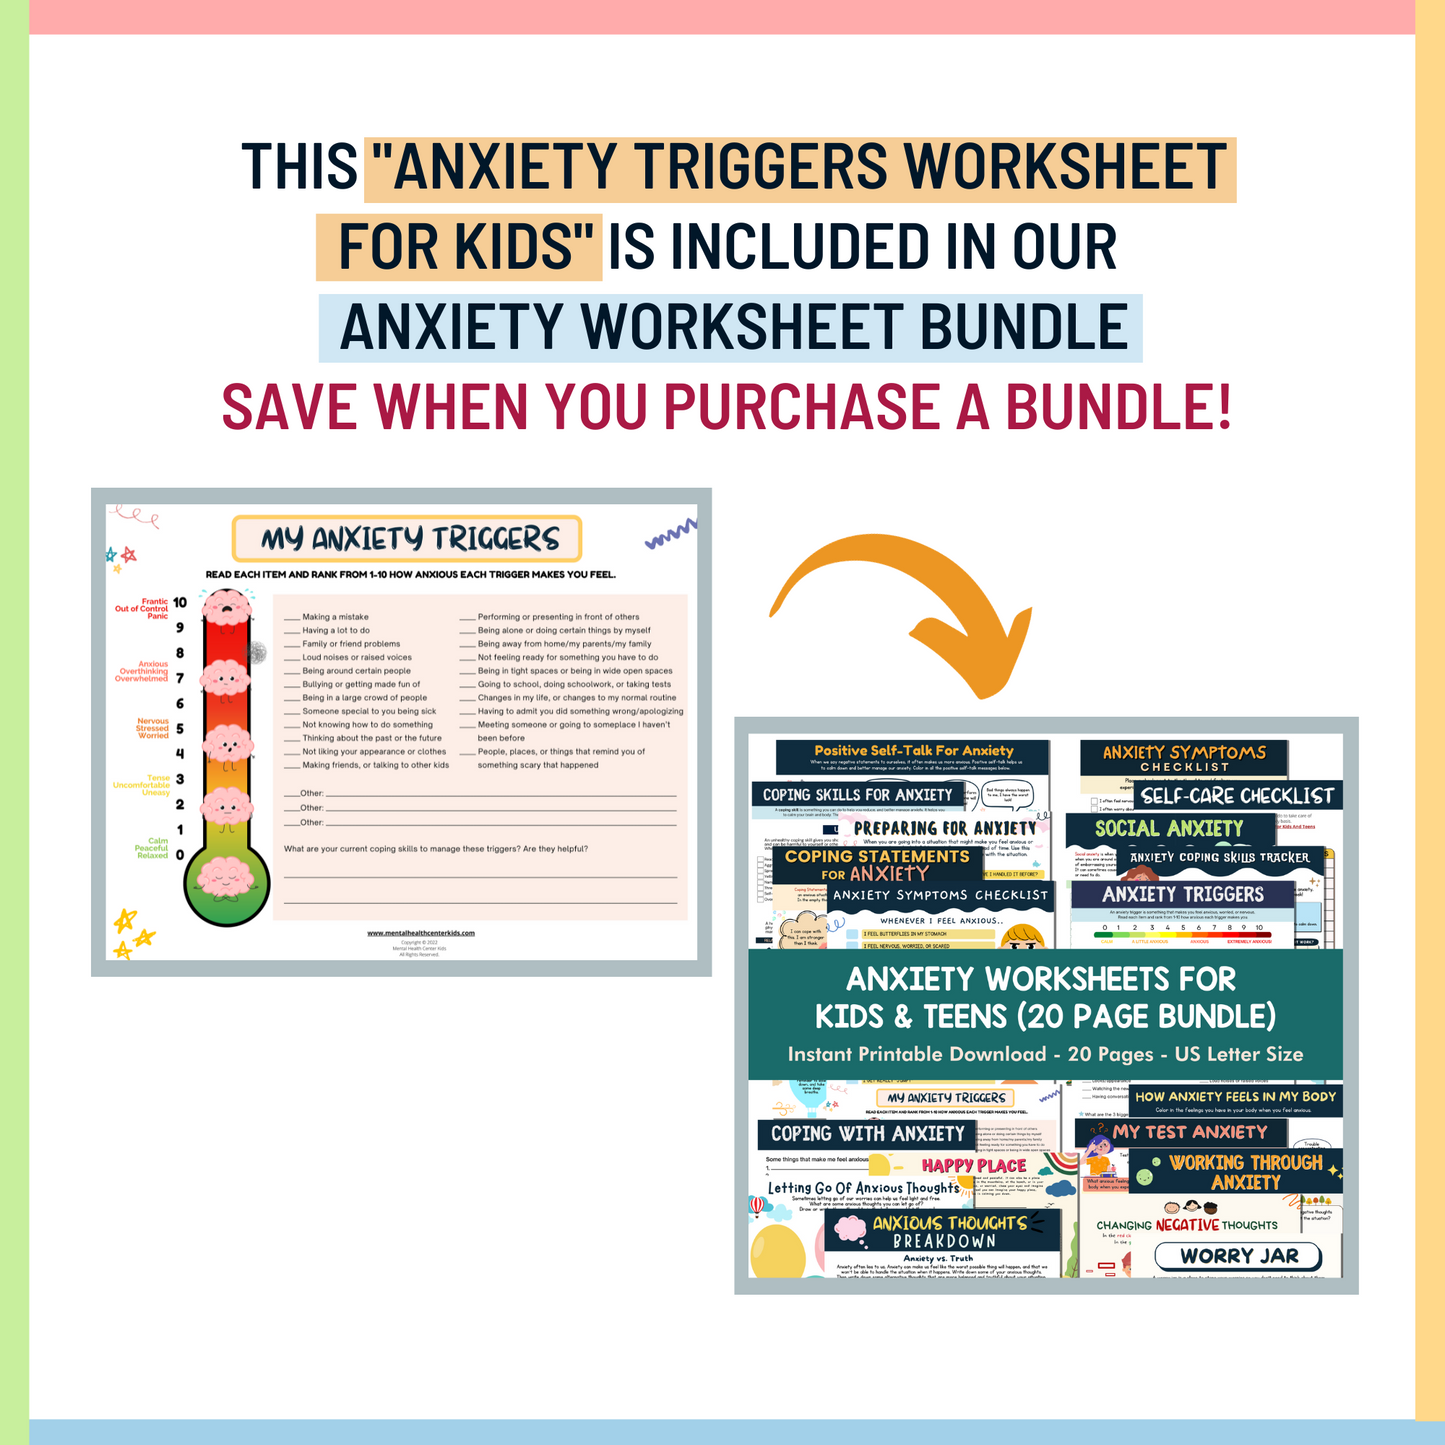 Anxiety Triggers Worksheet